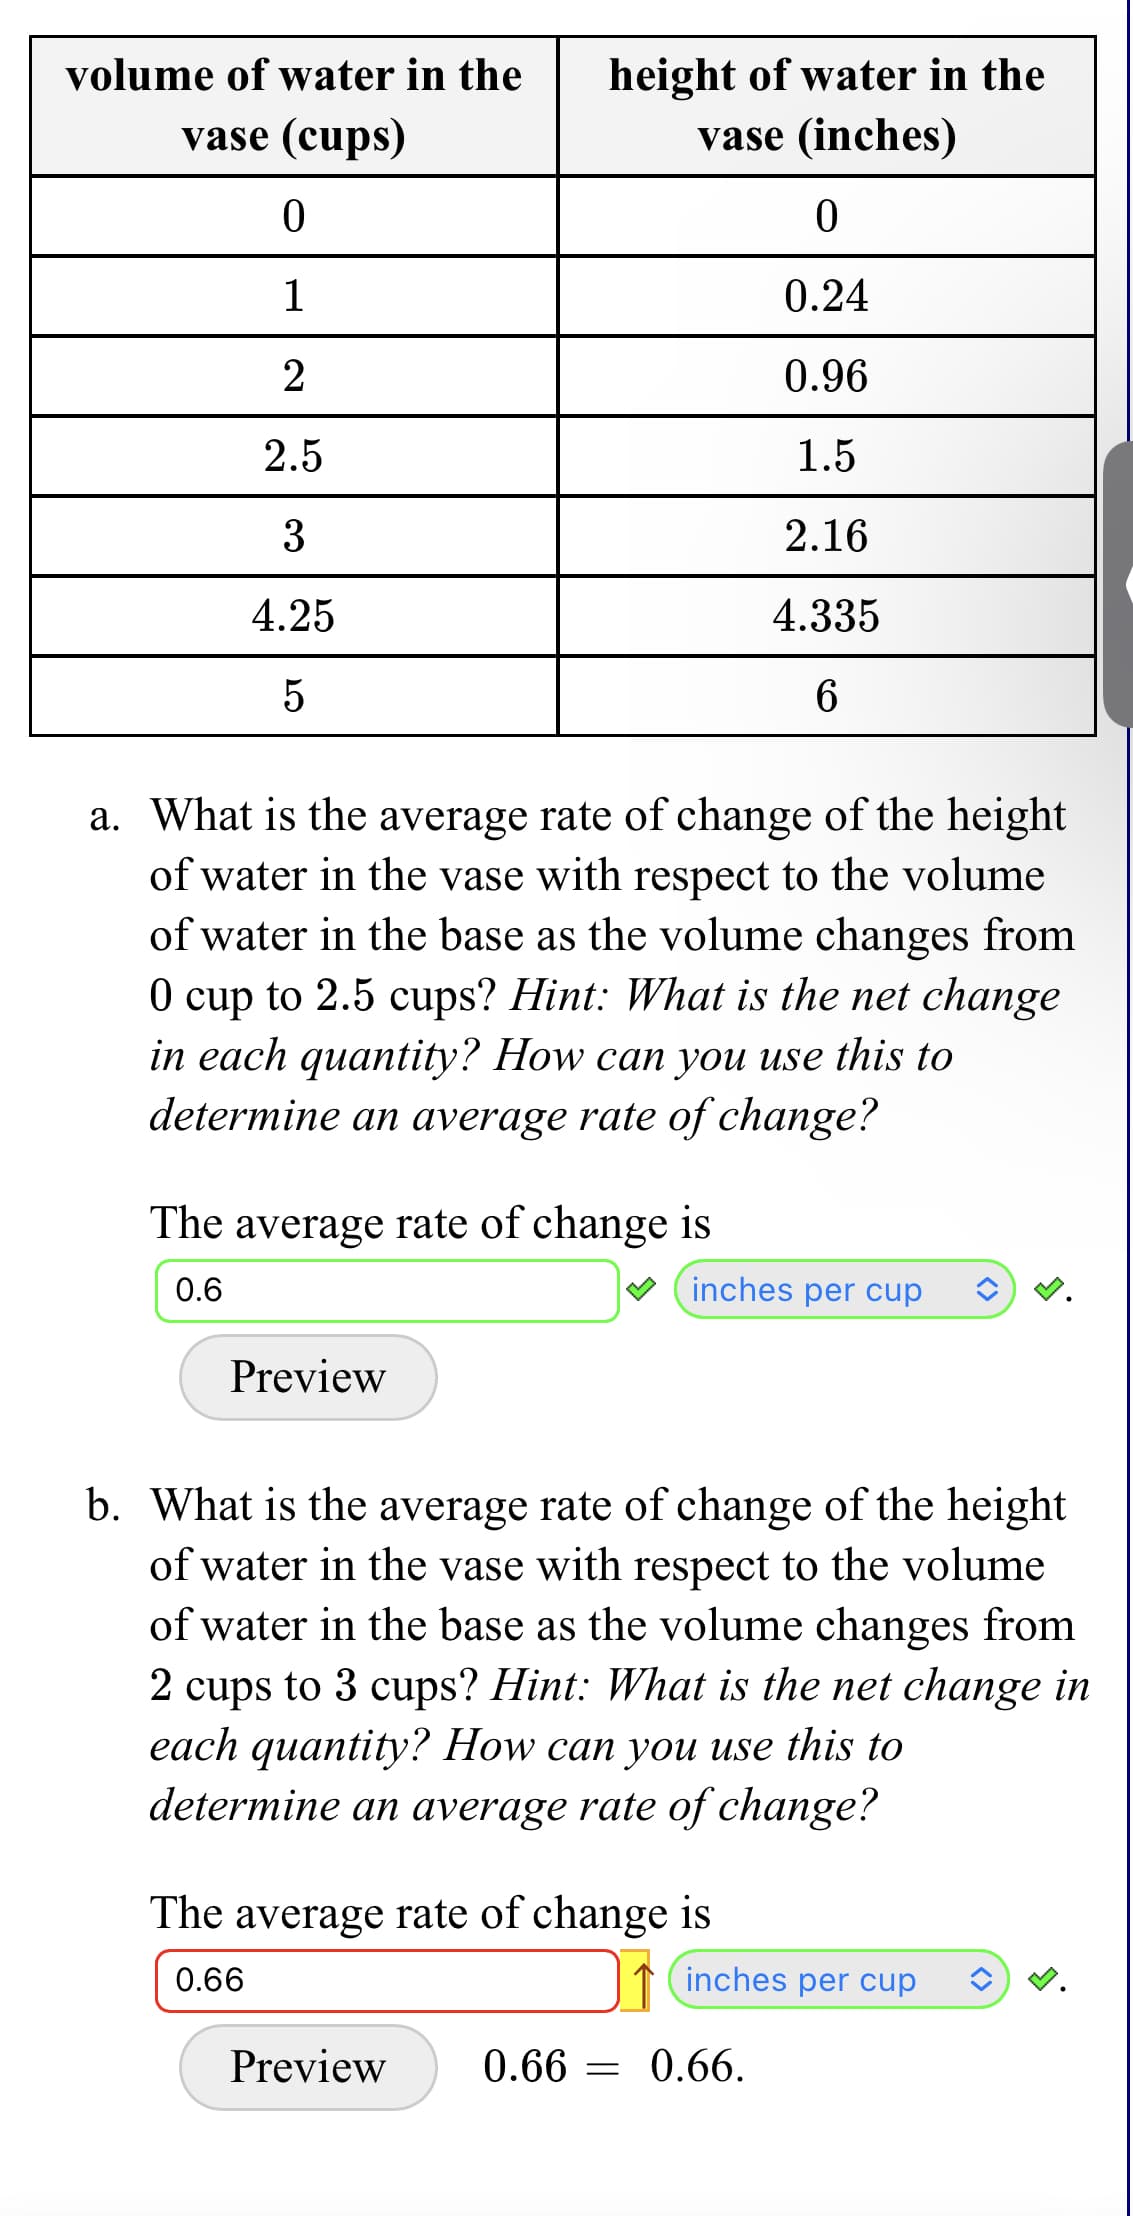 height of water in the
vase (inches)
volume of water in the
vase (cups)
1
0.24
2
0.96
2.5
1.5
3
2.16
4.25
4.335
a. What is the average rate of change of the height
of water in the vase with respect to the volume
of water in the base as the volume changes from
O cup to 2.5 cups? Hint: What is the net change
in each quantity? How can you use this to
determine an average rate of change?
The average rate of change is
0.6
(inches per cup
Preview
b. What is the average rate of change of the height
of water in the vase with respect to the volume
of water in the base as the volume changes from
2
cups
to 3 cups? Hint: What is the net change in
each quantity? How can you use this to
determine an average rate of change?
The average rate of change is
0.66
inches per cup
Preview
0.66 = 0.66.
